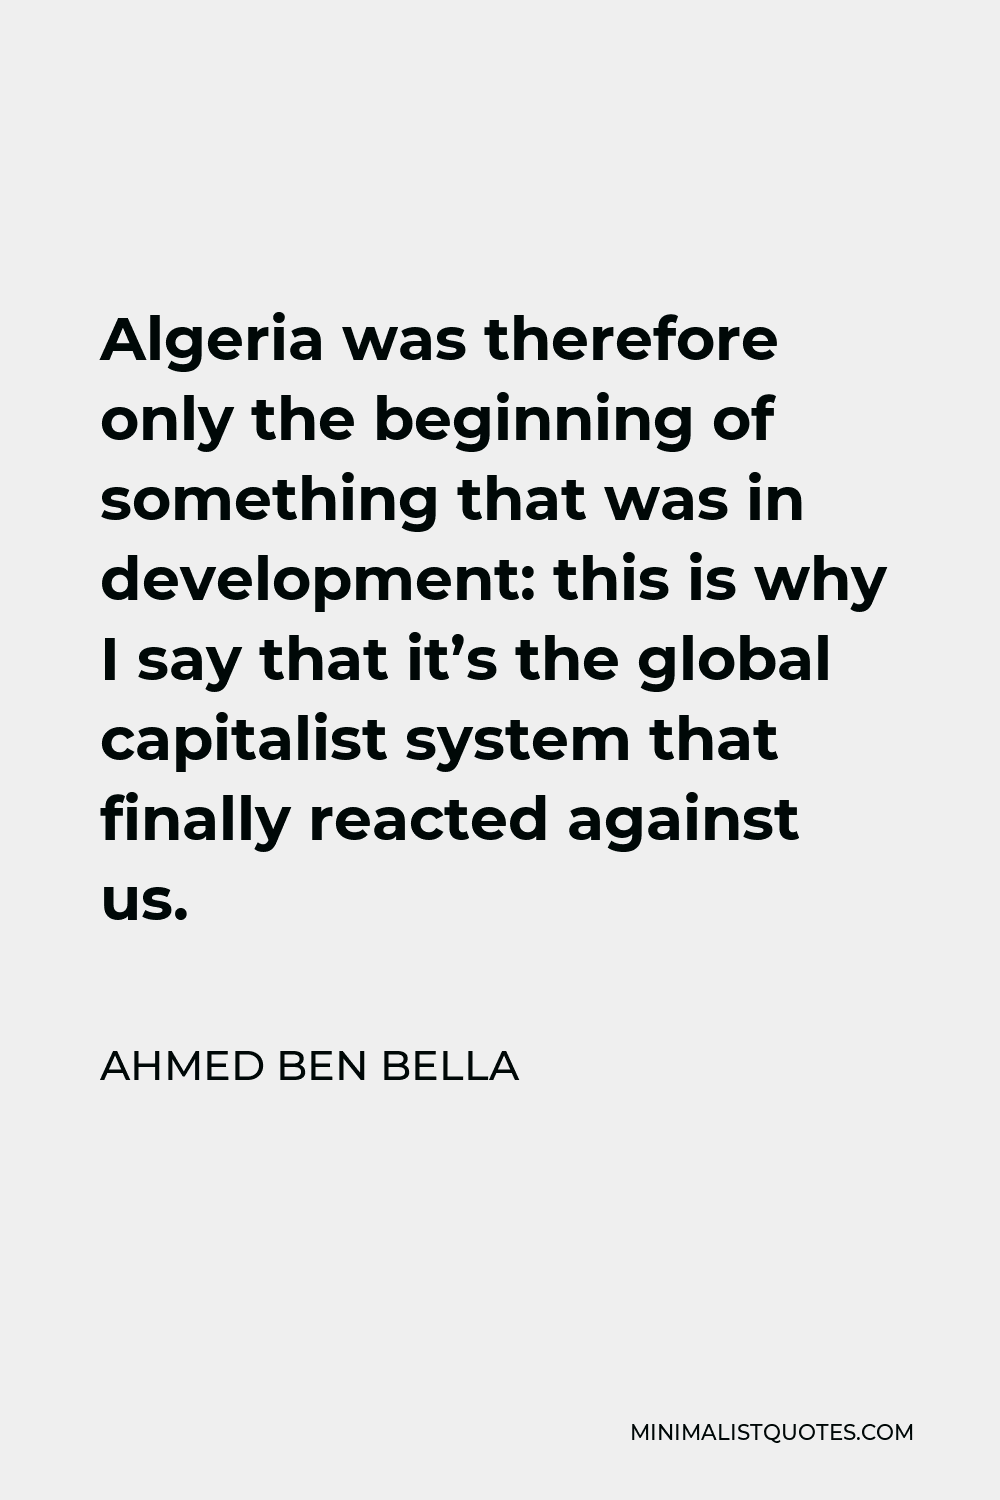 Ahmed Ben Bella Quote - Algeria was therefore only the beginning of something that was in development: this is why I say that it’s the global capitalist system that finally reacted against us.